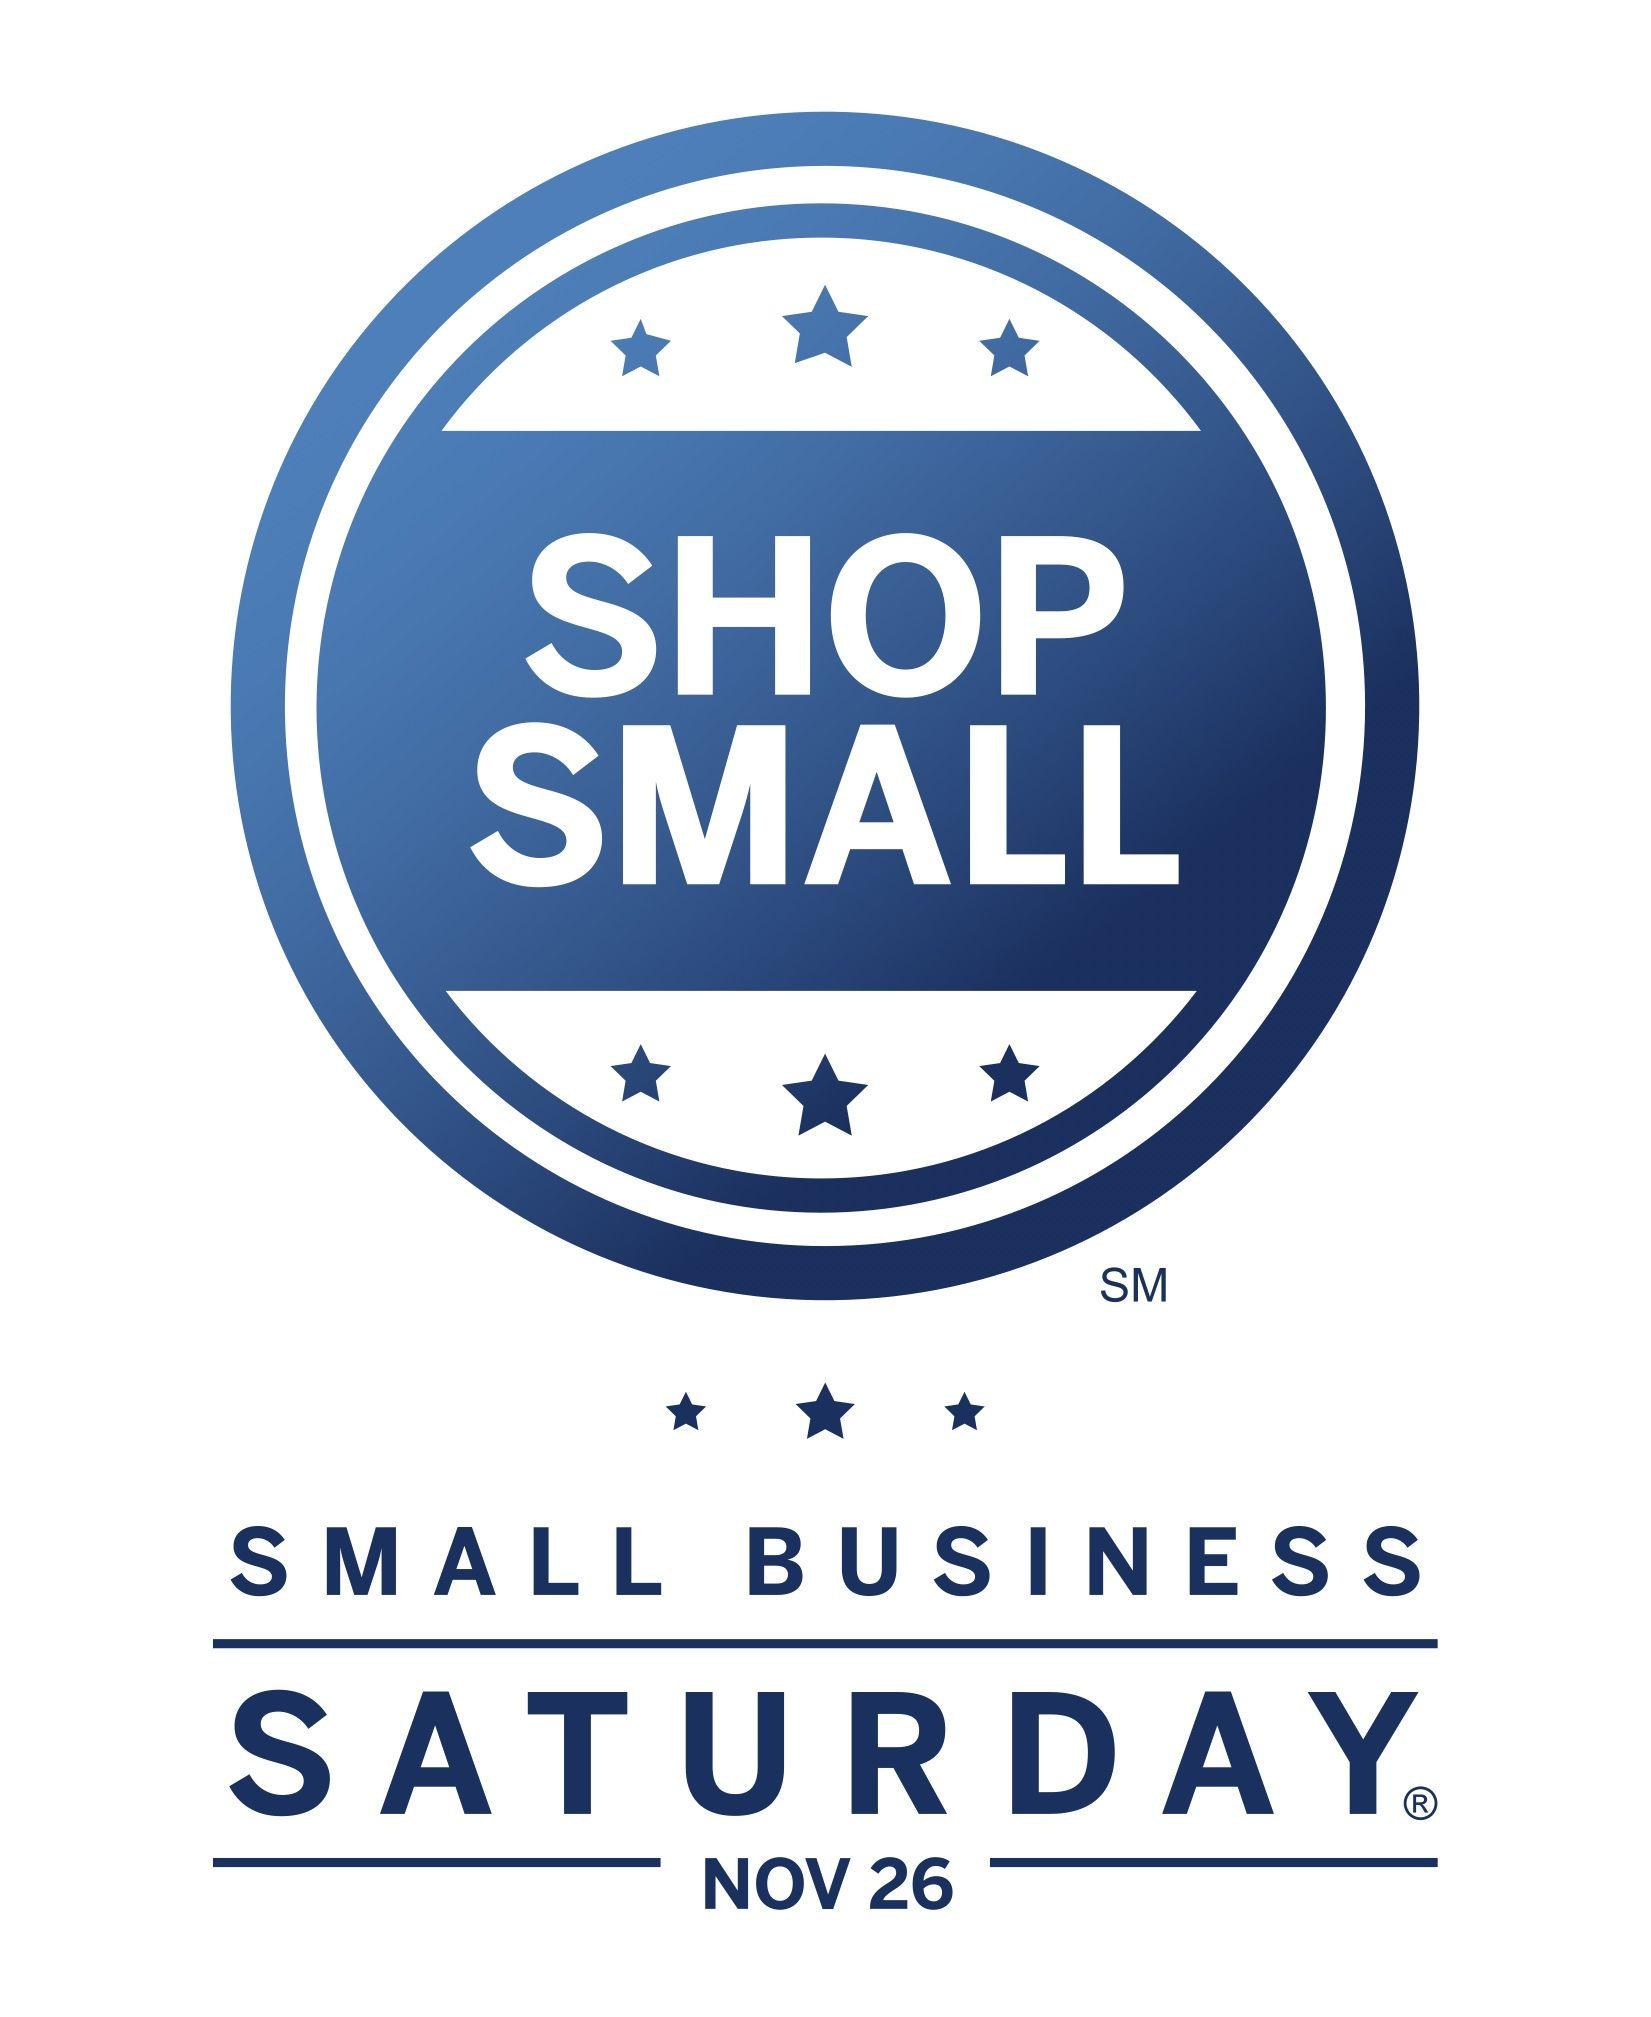 Shop Small Logo - Yola pledges to support Small Business Saturday®